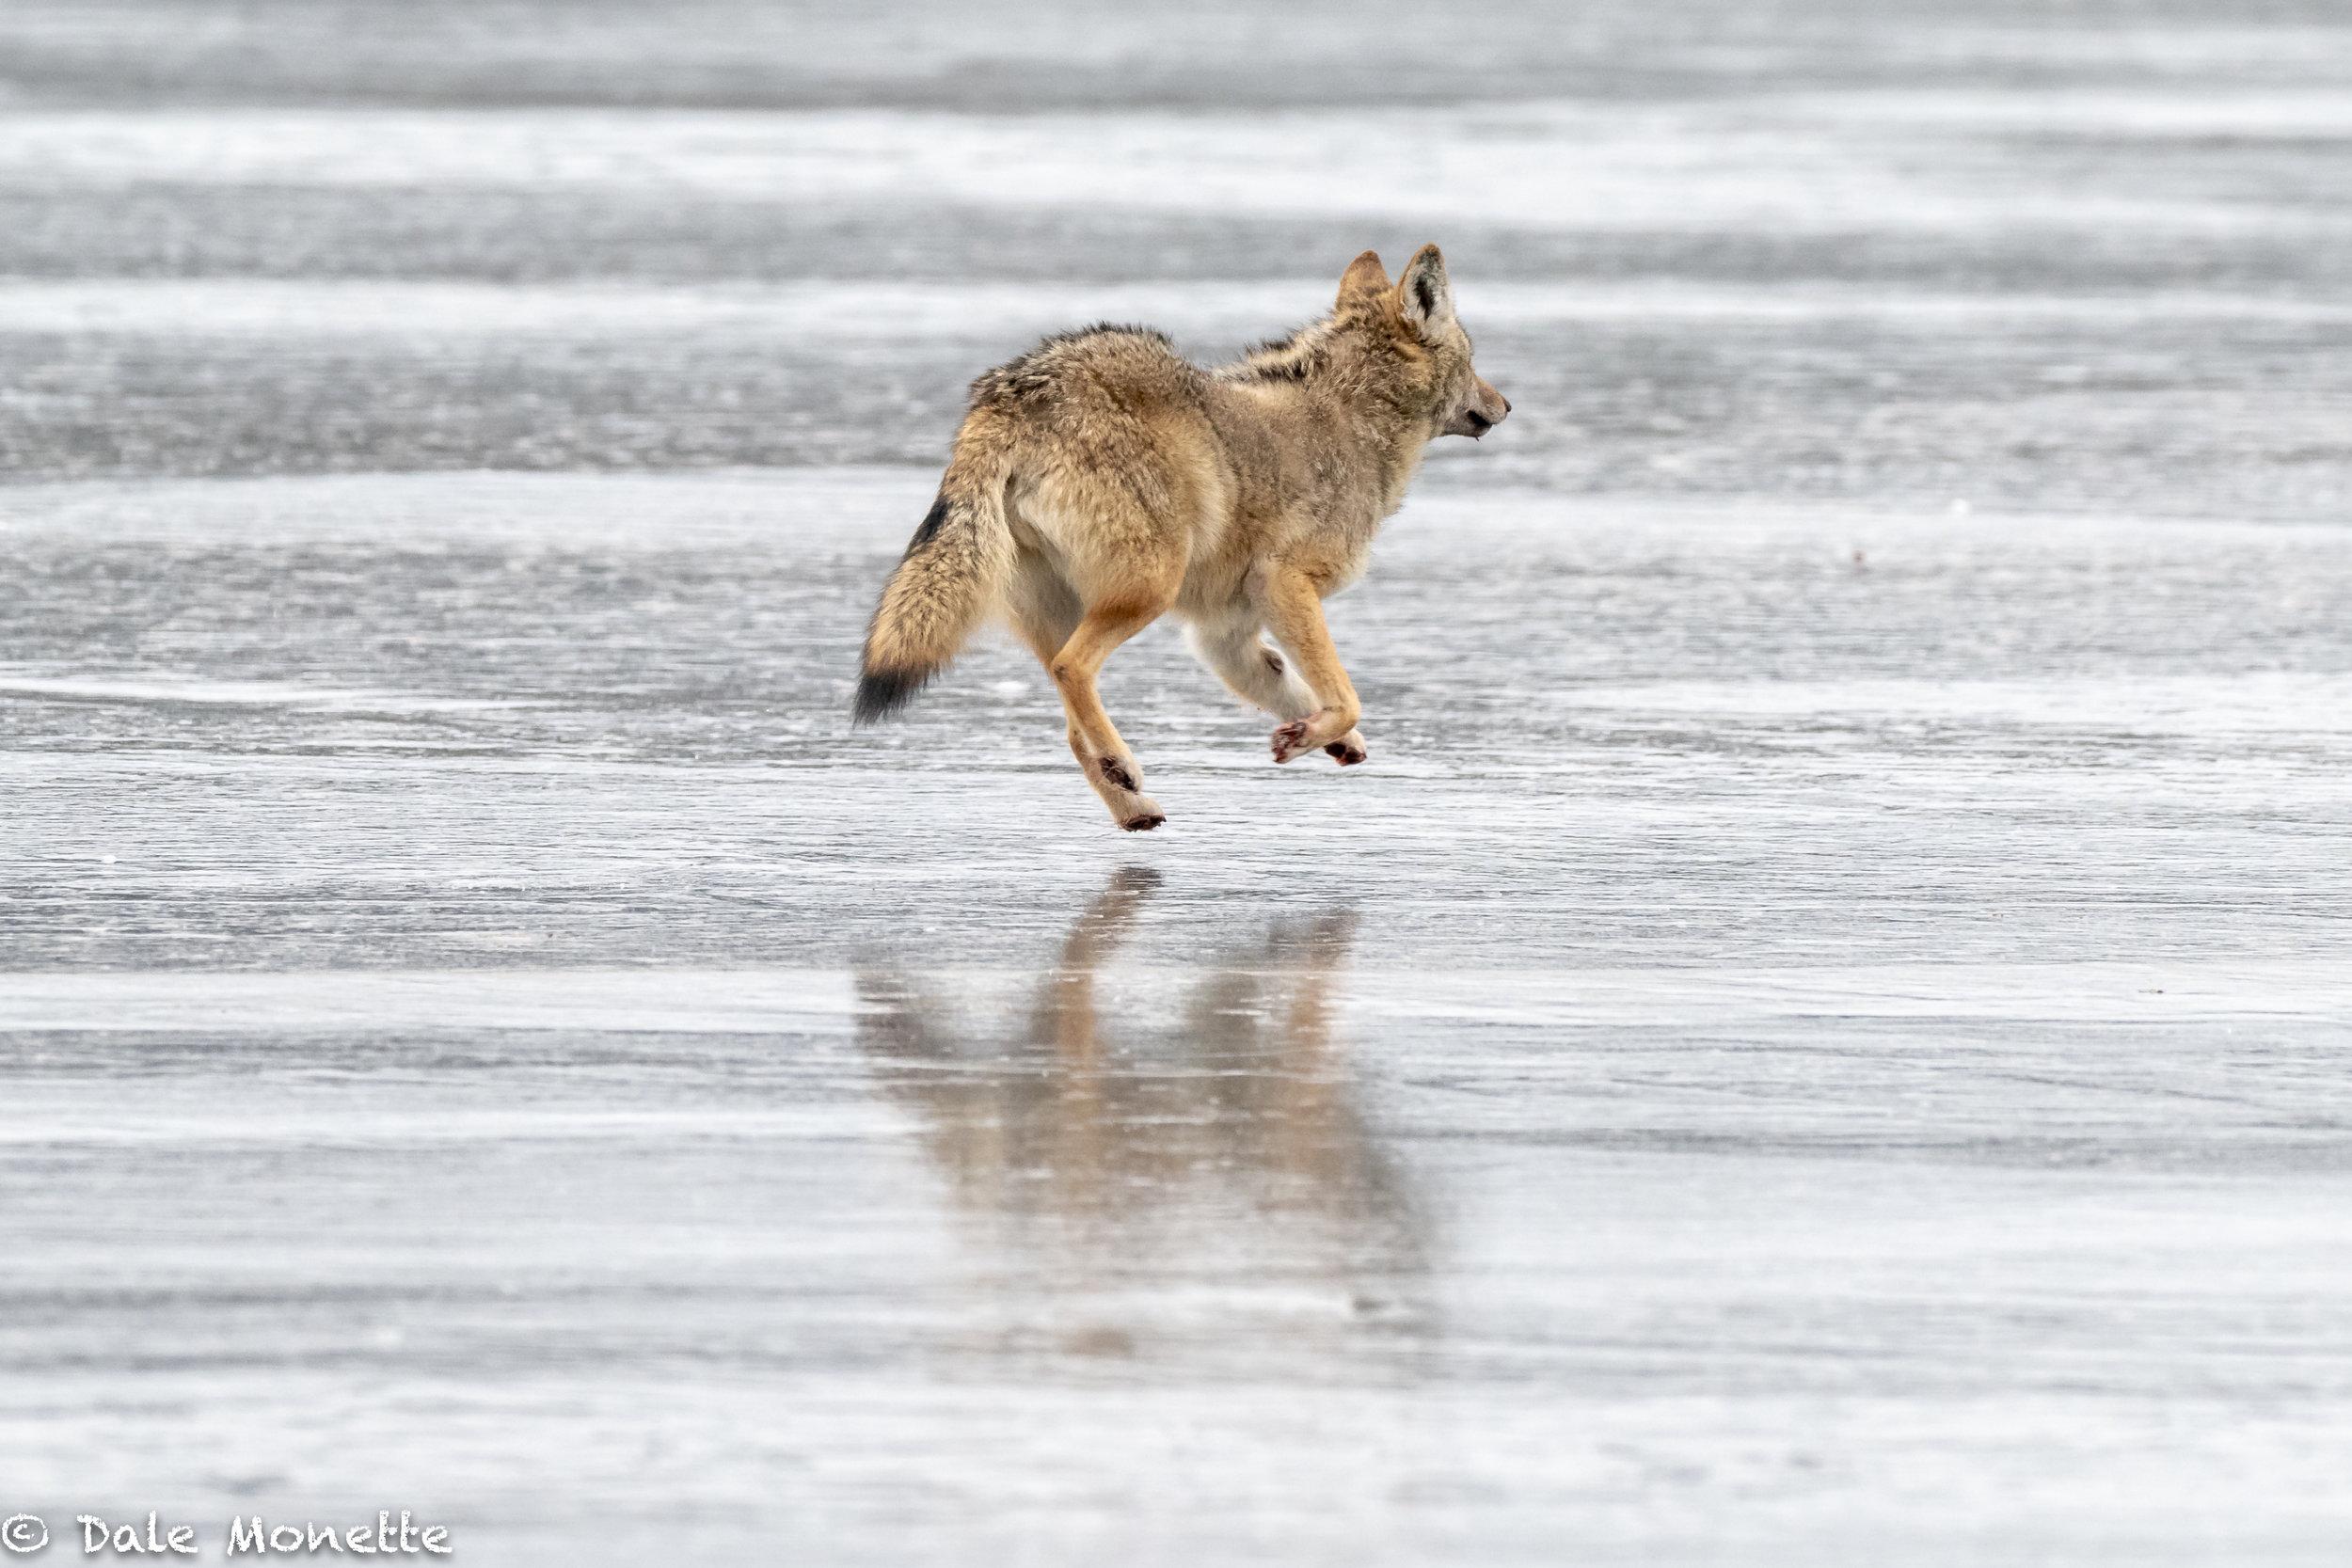   All the noise of the ice cracking kept this coyote pretty nervous while feeding on the deer carcass until finally it left running.  